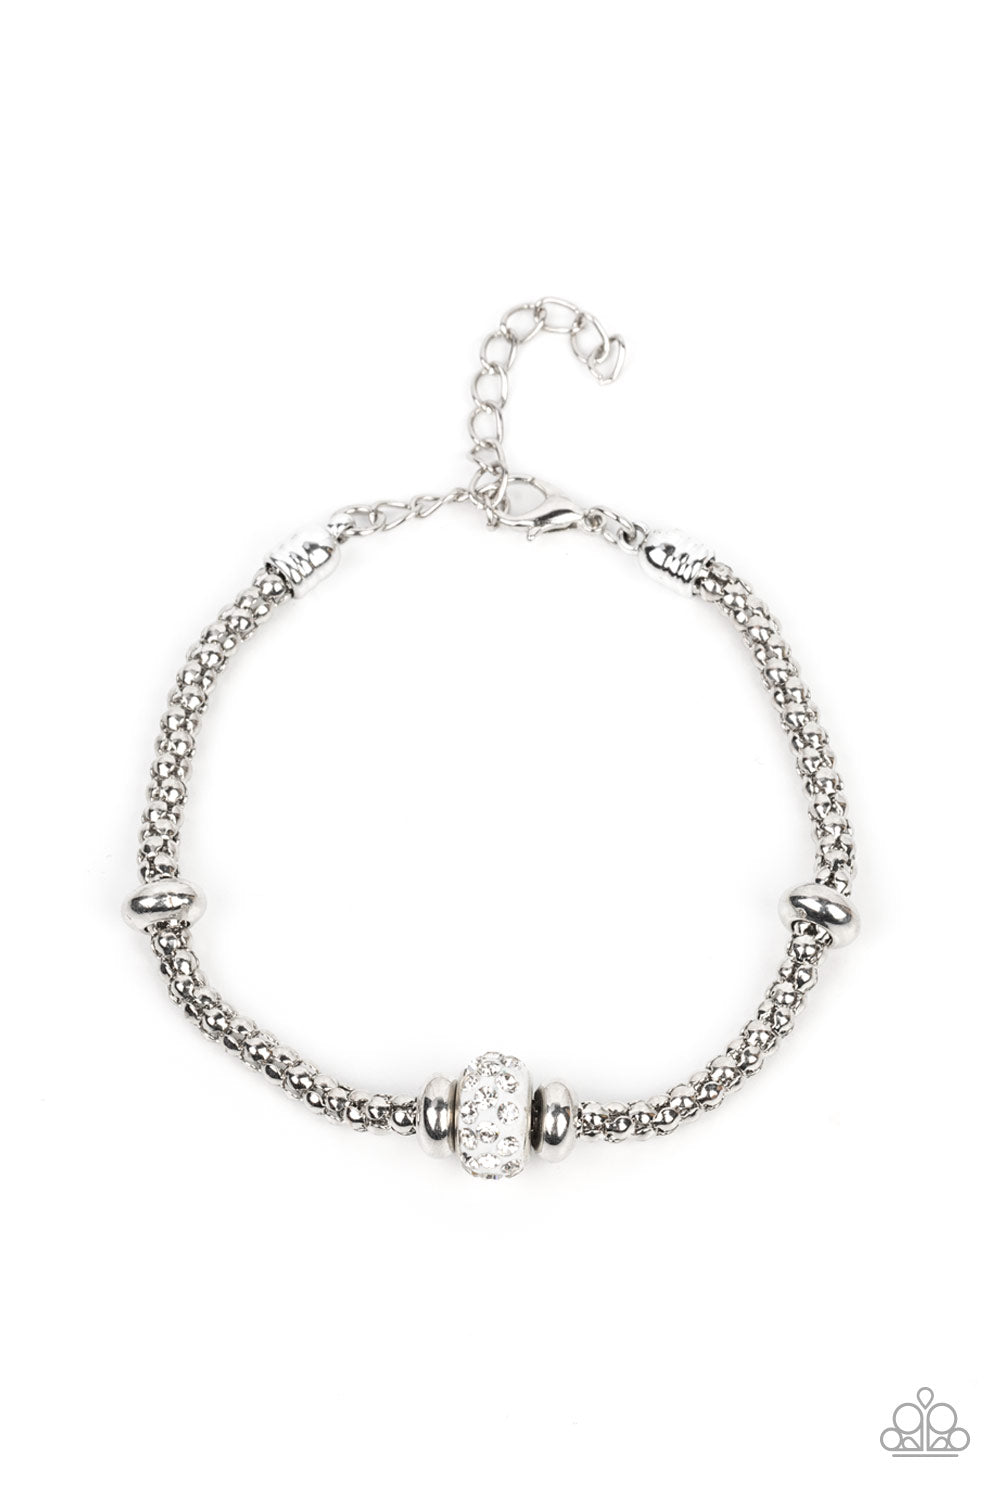 Downtown Decoupage - White and Silver Bracelet - Paparazzi Accessories - Flanked by silver disc-like beads, a white rhinestone dotted bead adorns the center of a silver popcorn chain around the wrist for a dazzling finish. Features an adjustable clasp closure. Sold as one individual bracelet.